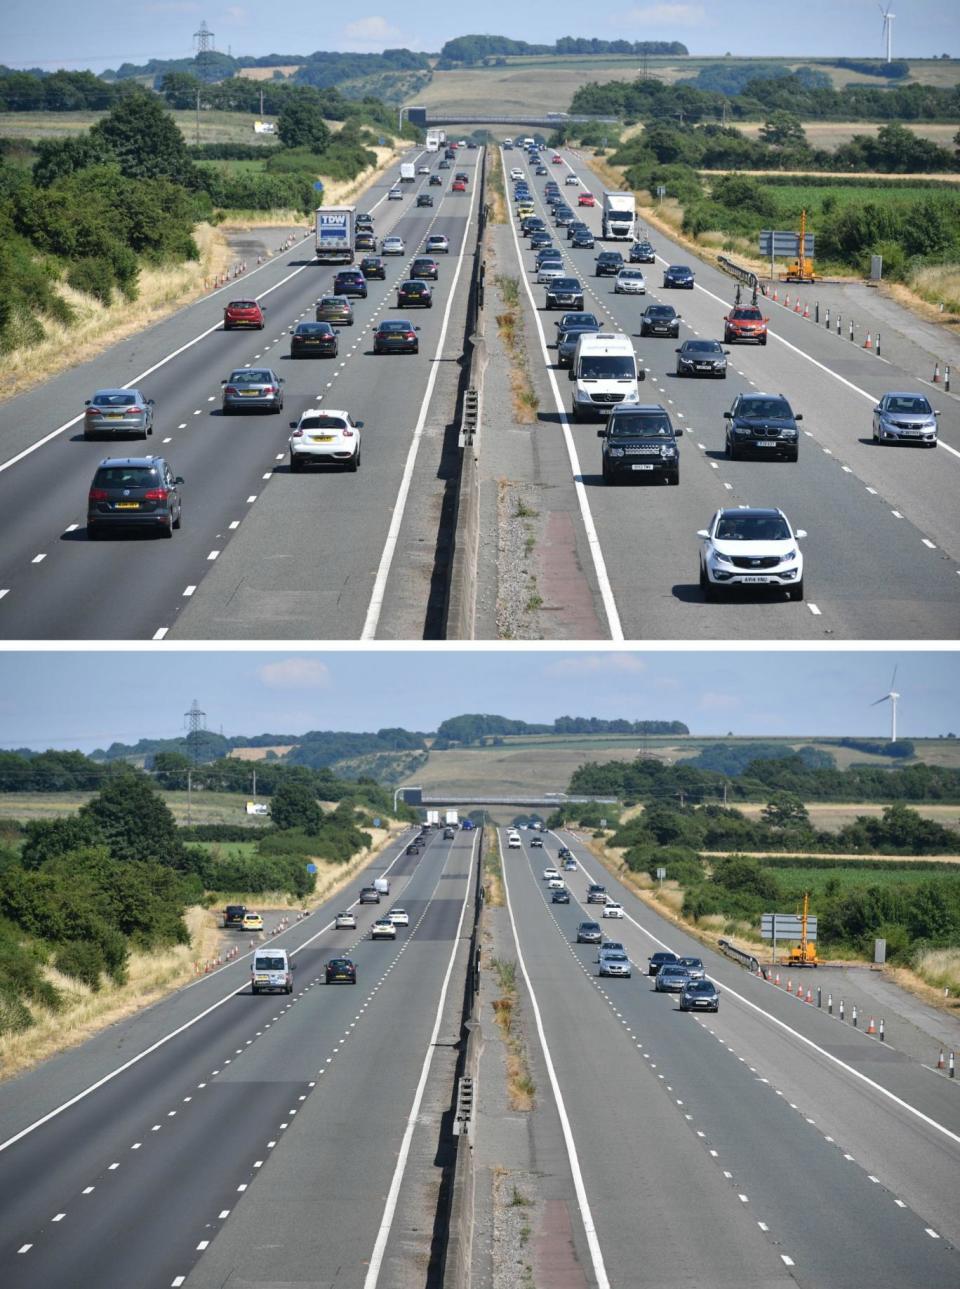 World Cup 2018: UK's motorways completely deserted as millions watch team beat Sweden 2-0